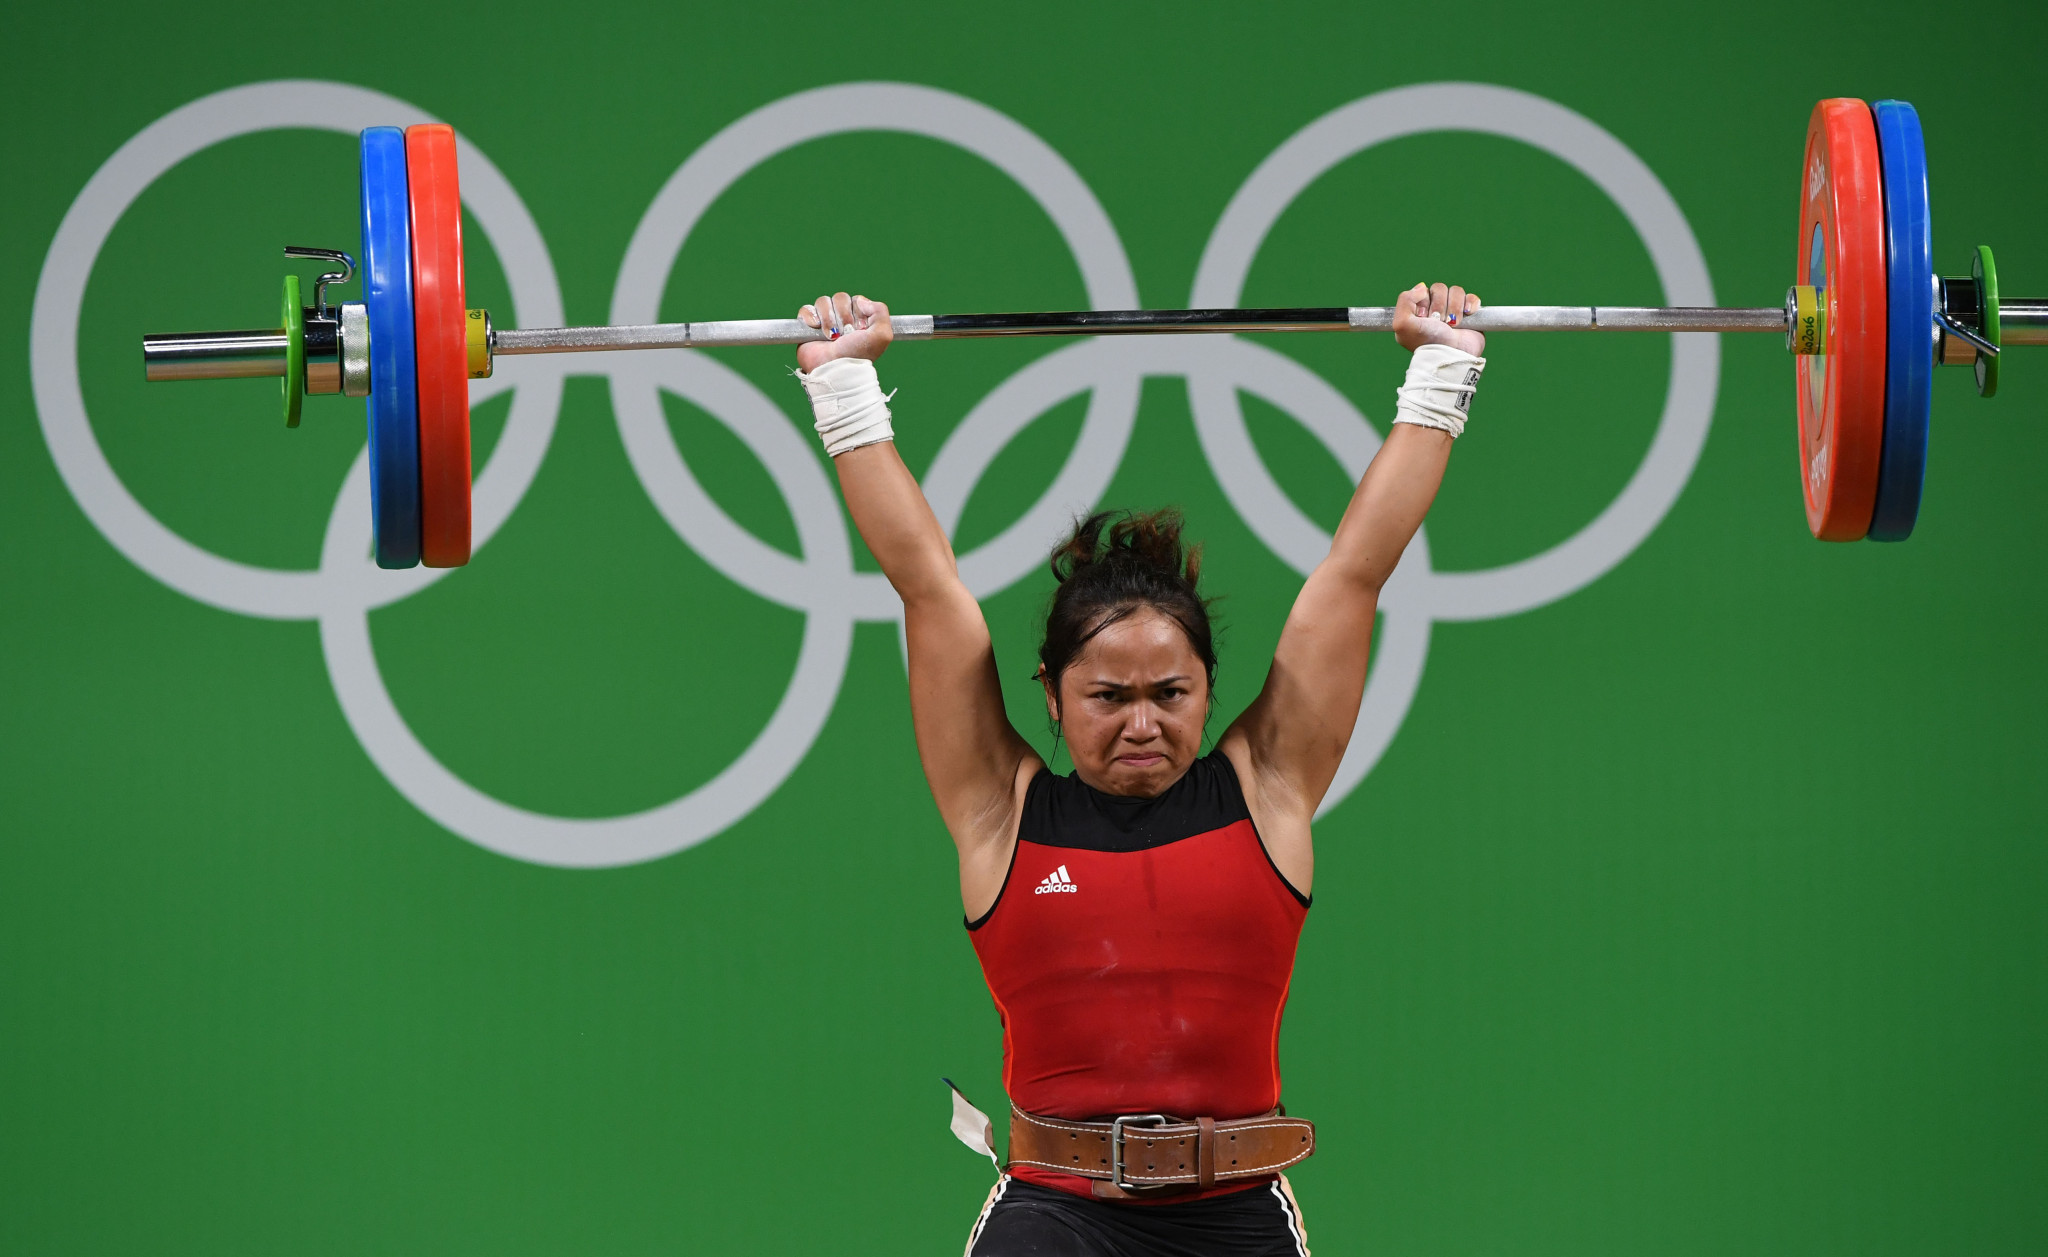 Hidilyn Diaz won a silver medal in weightlifting at the 2016 Olympics in Rio de Janeiro ©Getty Images